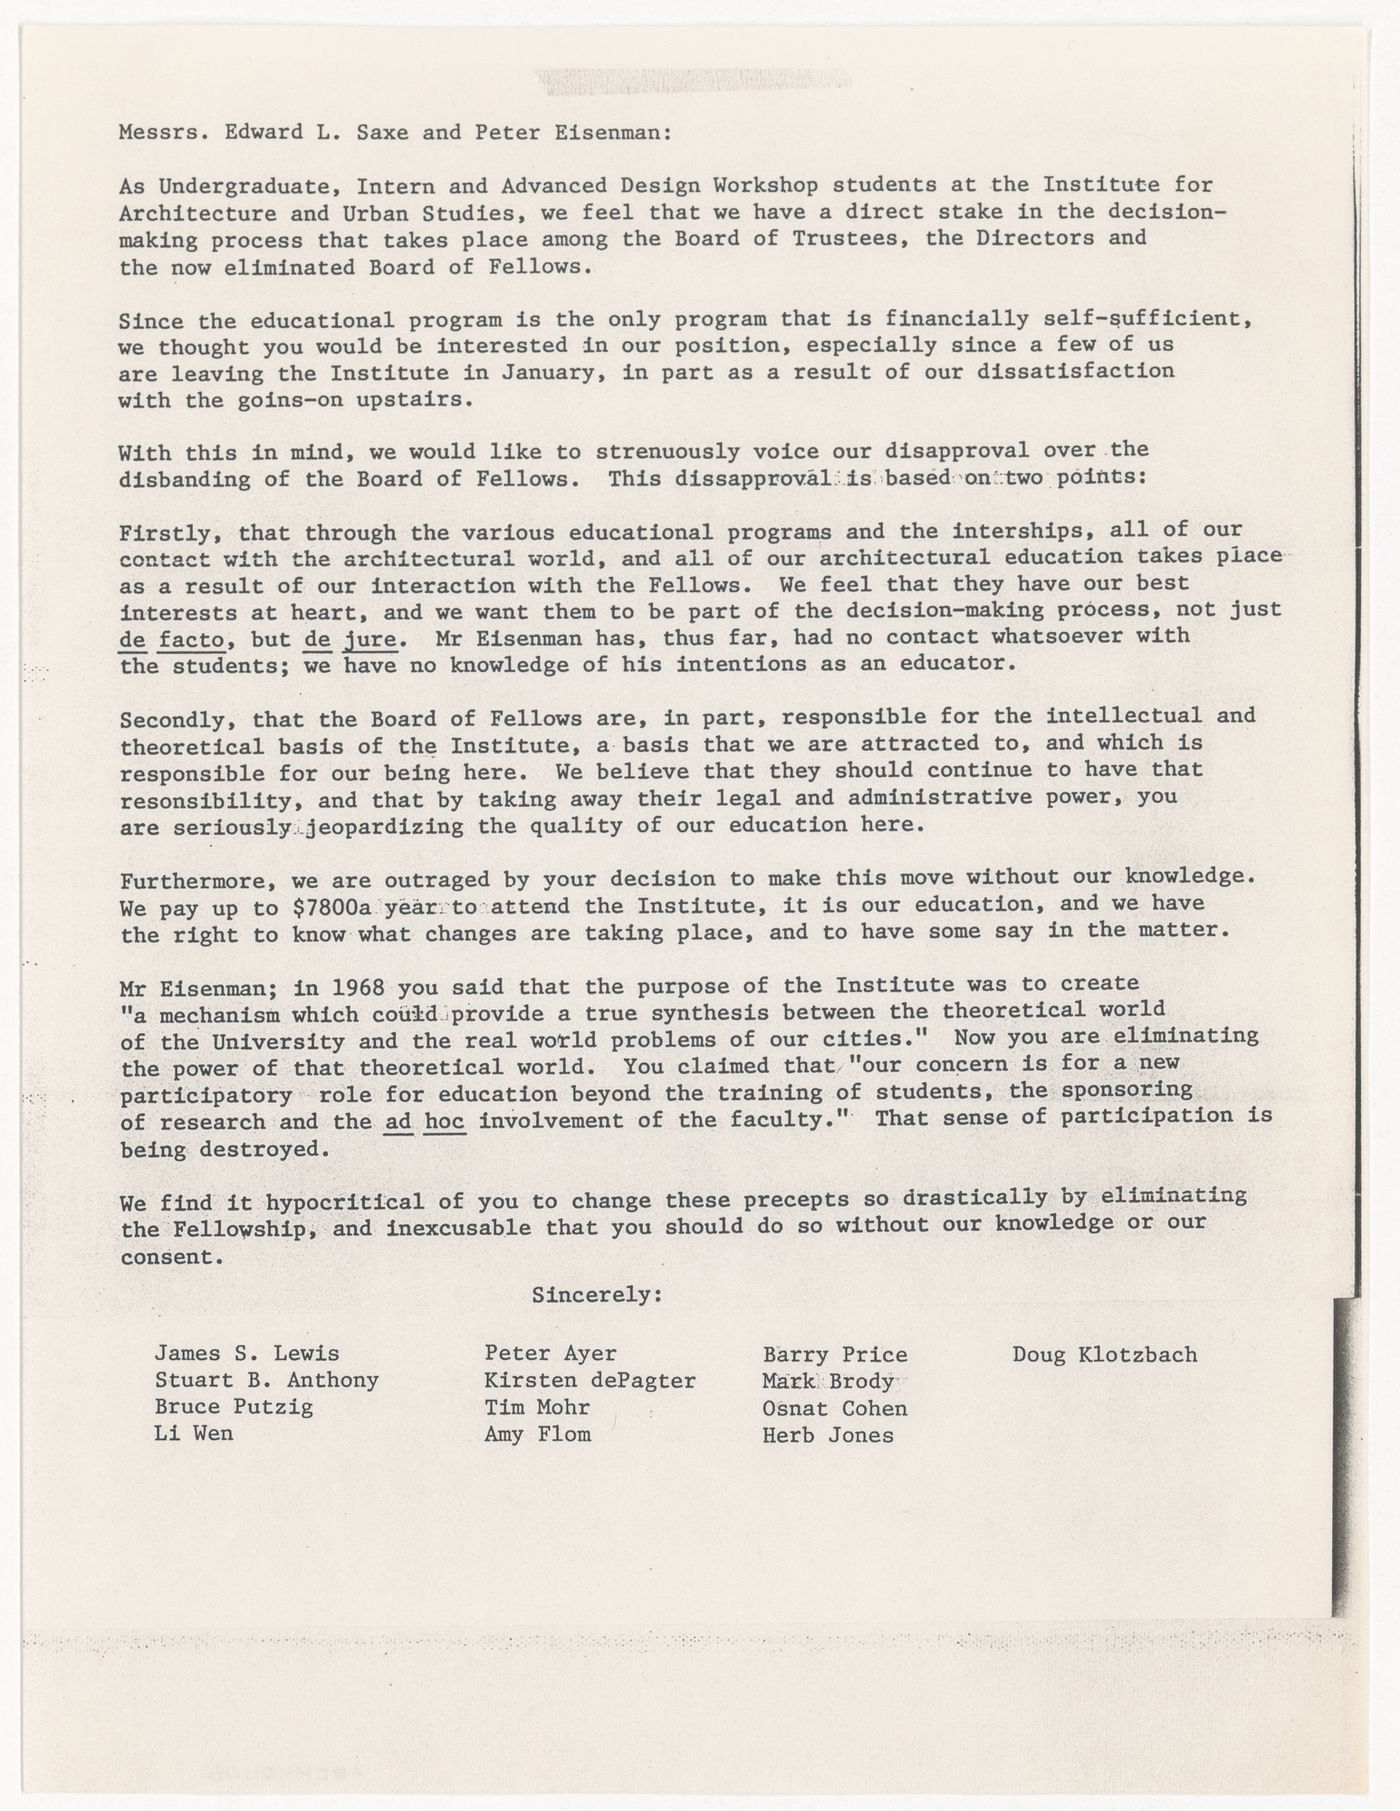 Memorandum from IAUS students to Edward L. Saxe and Peter D. Eisenman about the disbanding of the Board of Fellows